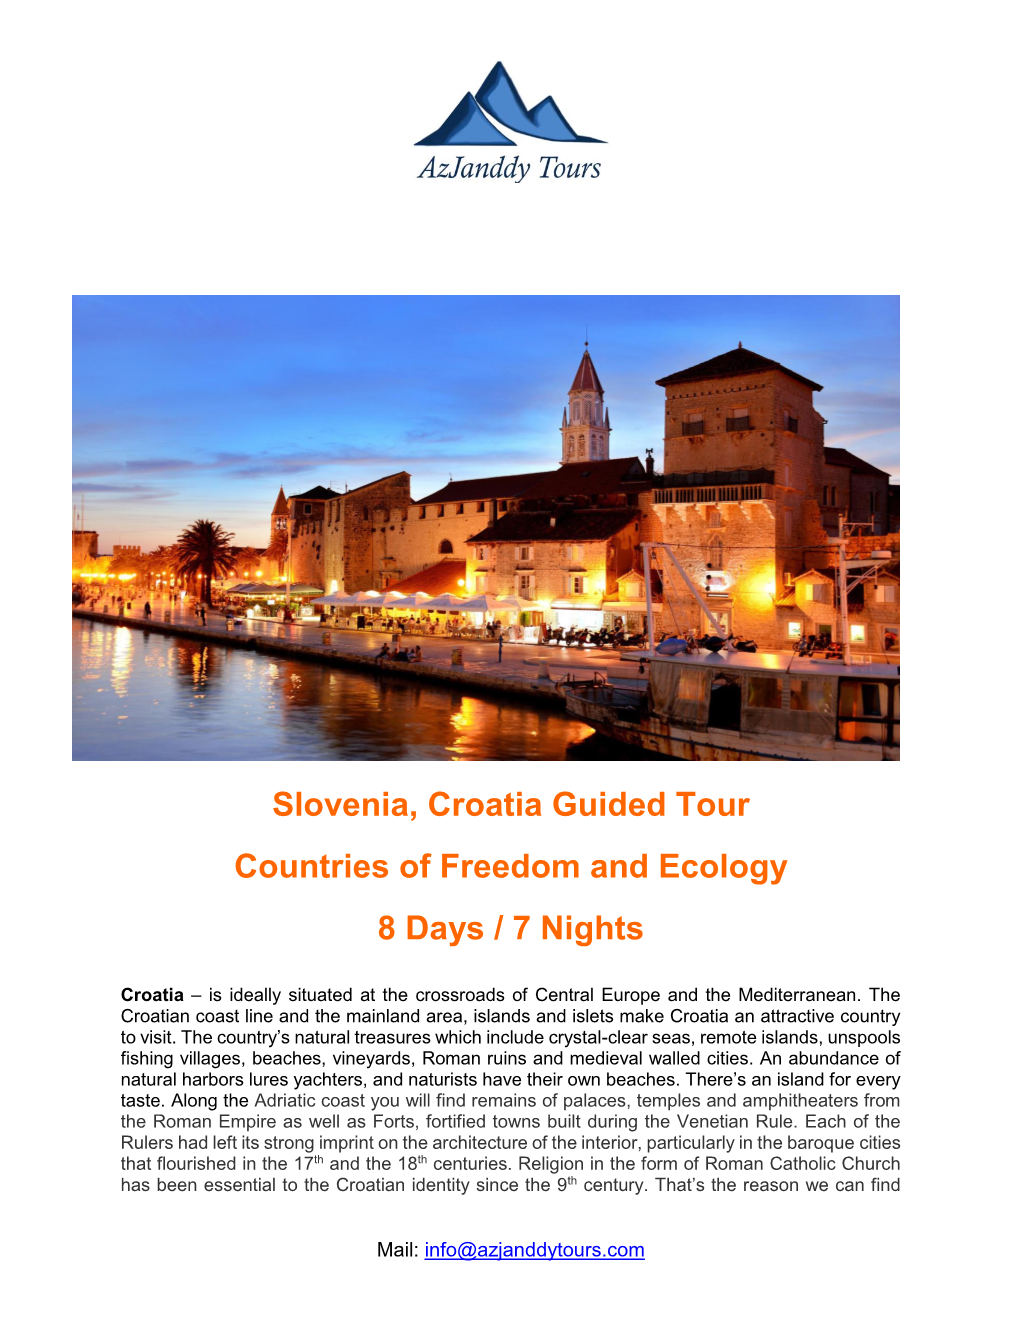 Slovenia, Croatia Guided Tour Countries of Freedom and Ecology 8 Days / 7 Nights